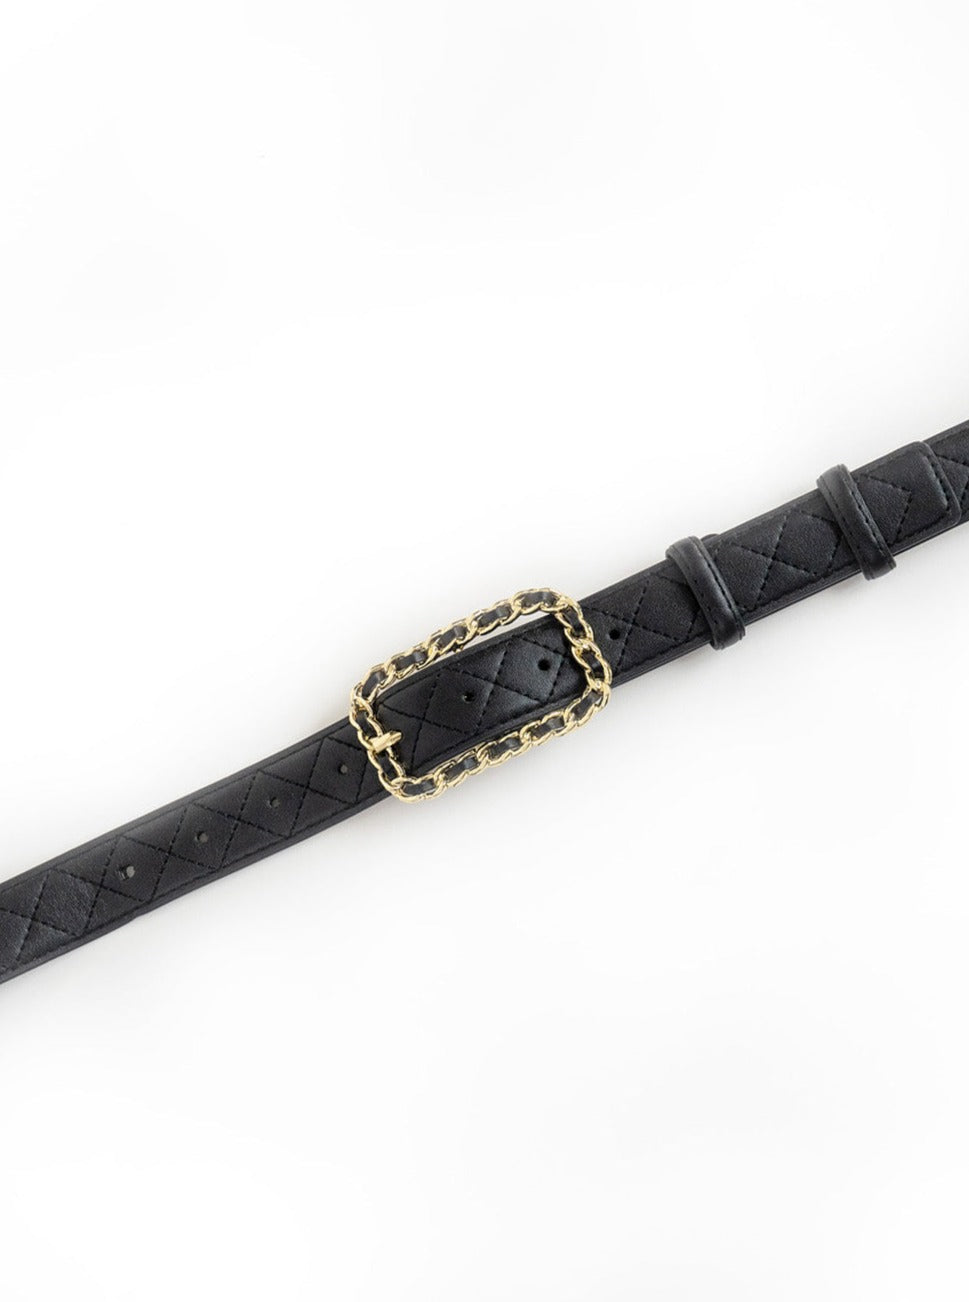 My Accessories London Quilted Chain Buckle Belt in Black |  Everyday | Casual | Essential | Glam | Women | Women's  | Belts | Work | Date | Old Money | Plaza Core | Twee |